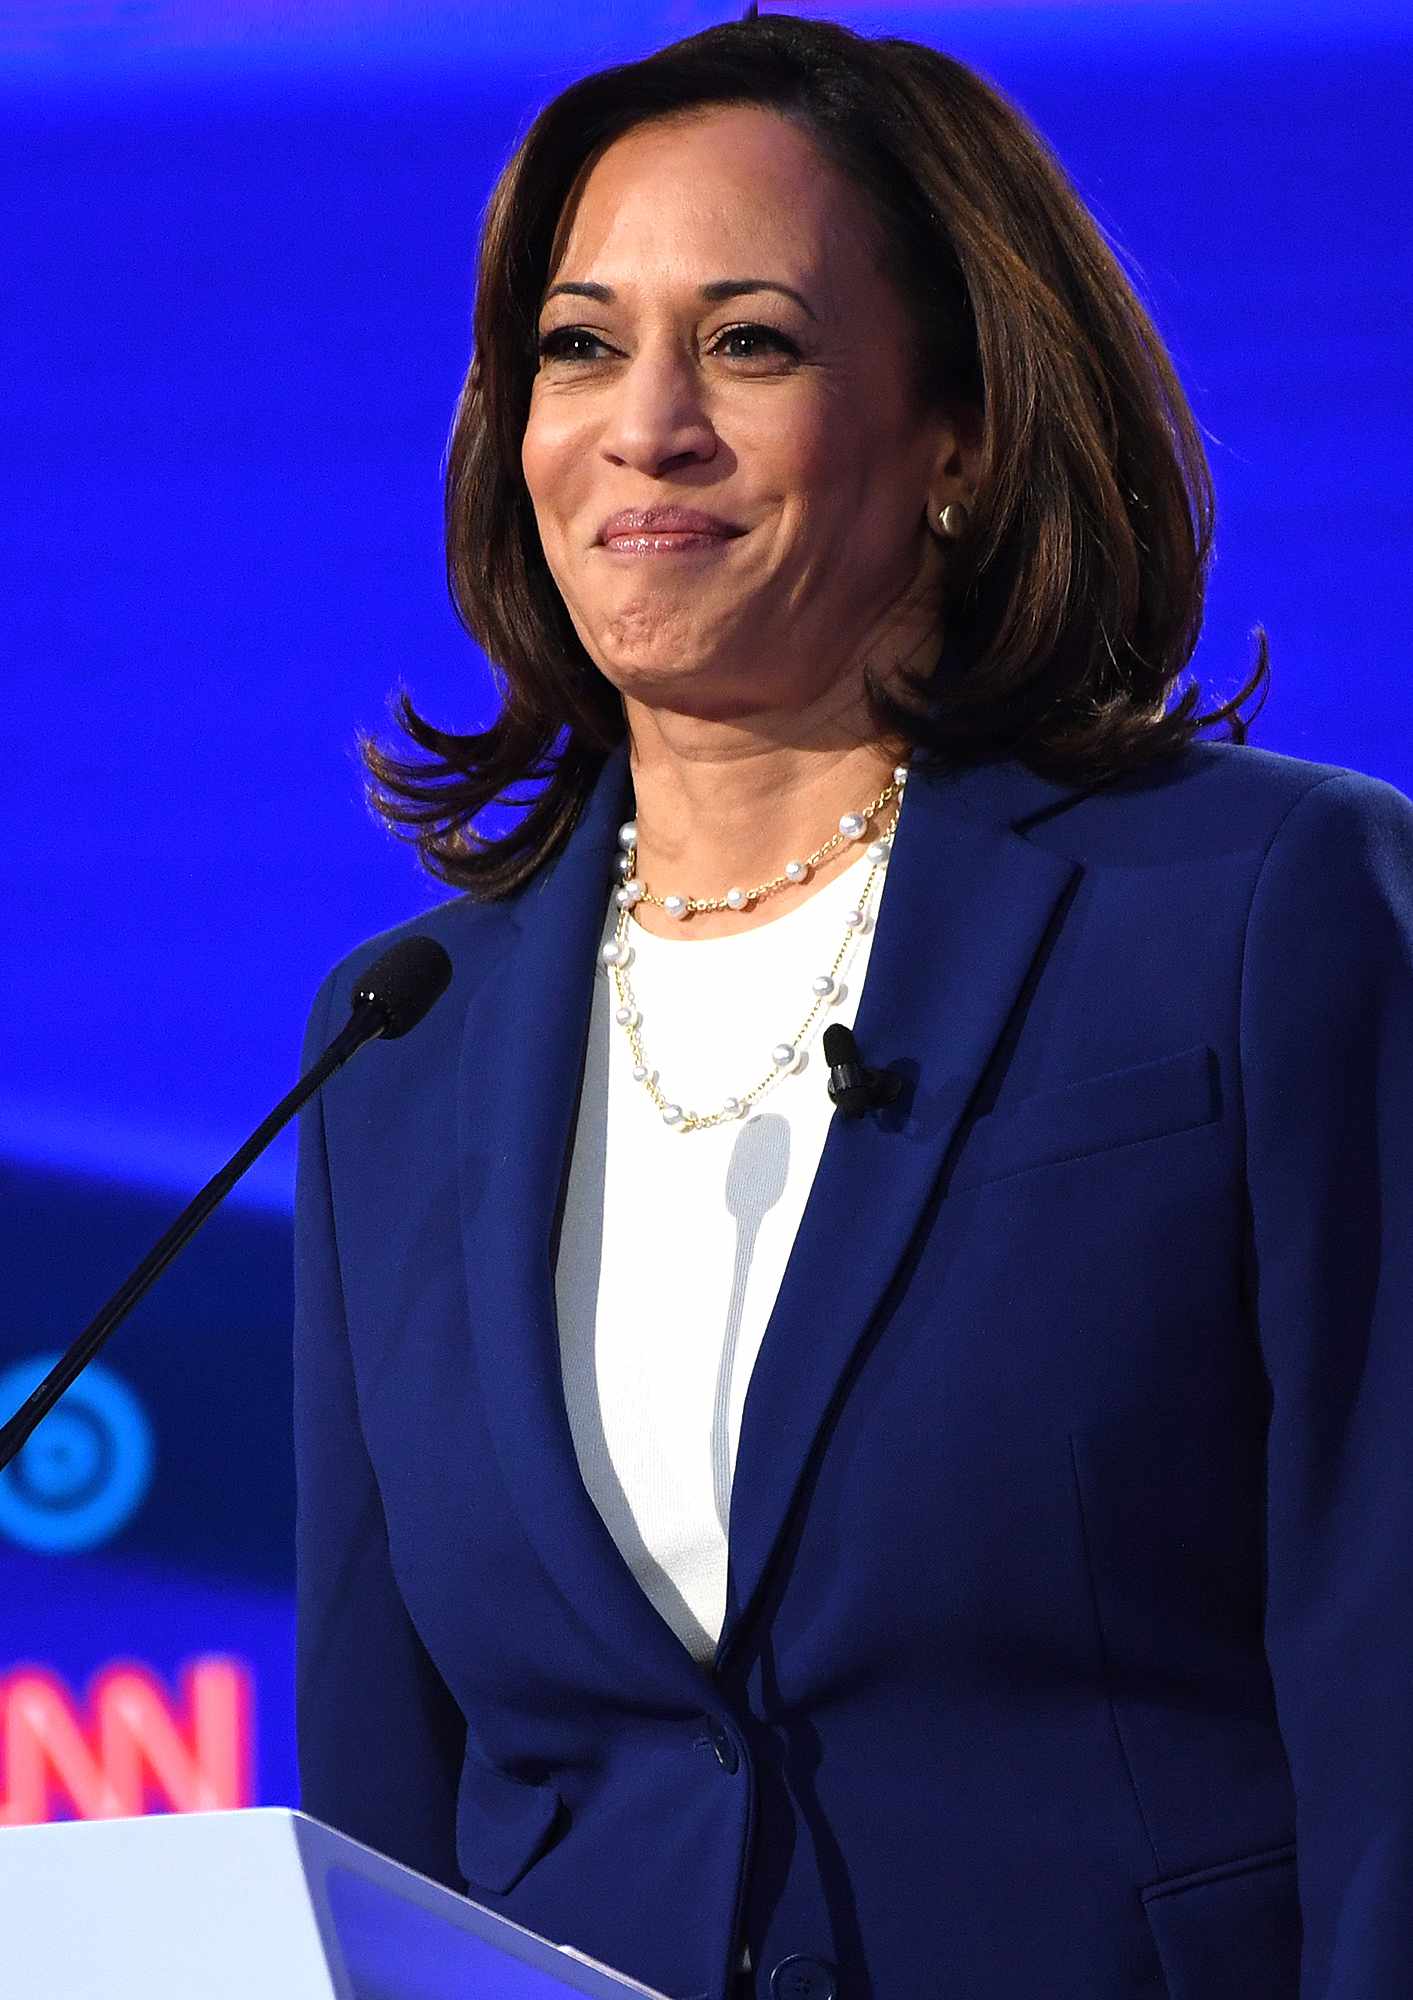 The Serious Side - part 8 - Page 15 Image?url=https%3A%2F%2Fstatic.onecms.io%2Fwp-content%2Fuploads%2Fsites%2F20%2F2019%2F12%2Fkamala-harris-2-1